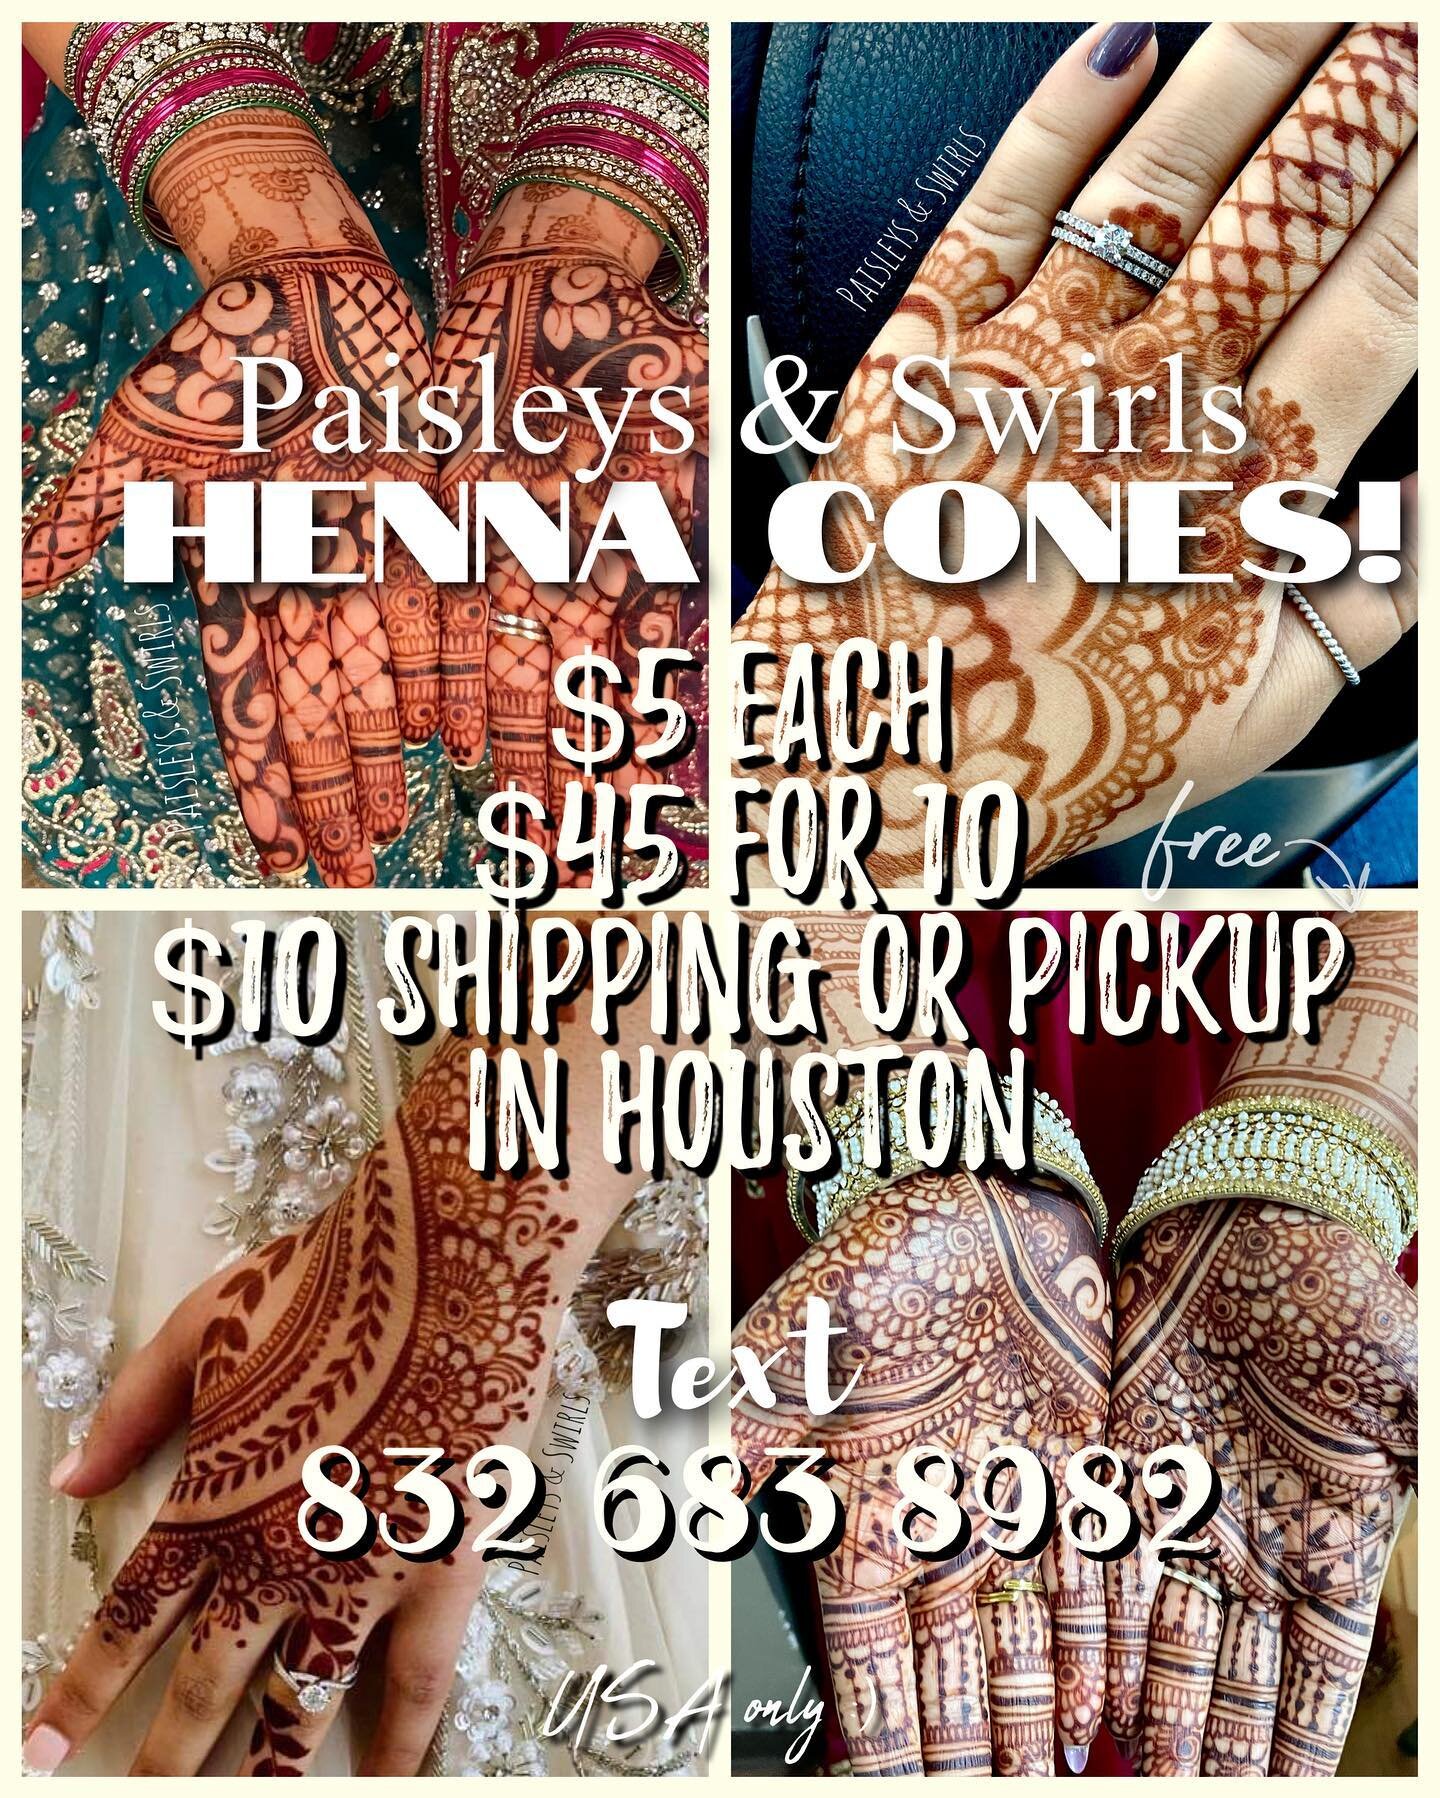 Get them in time for Eid! I need orders at least 48 hrs in advance. Cones are 20 grams each. Pickup is in Meyerland 77096. DM or text 
.
.
.
.
.
.
.
.
#naturalhenna #houstonhenna #hennahouston #mehndisupplier #hennasupplier #eidhenna